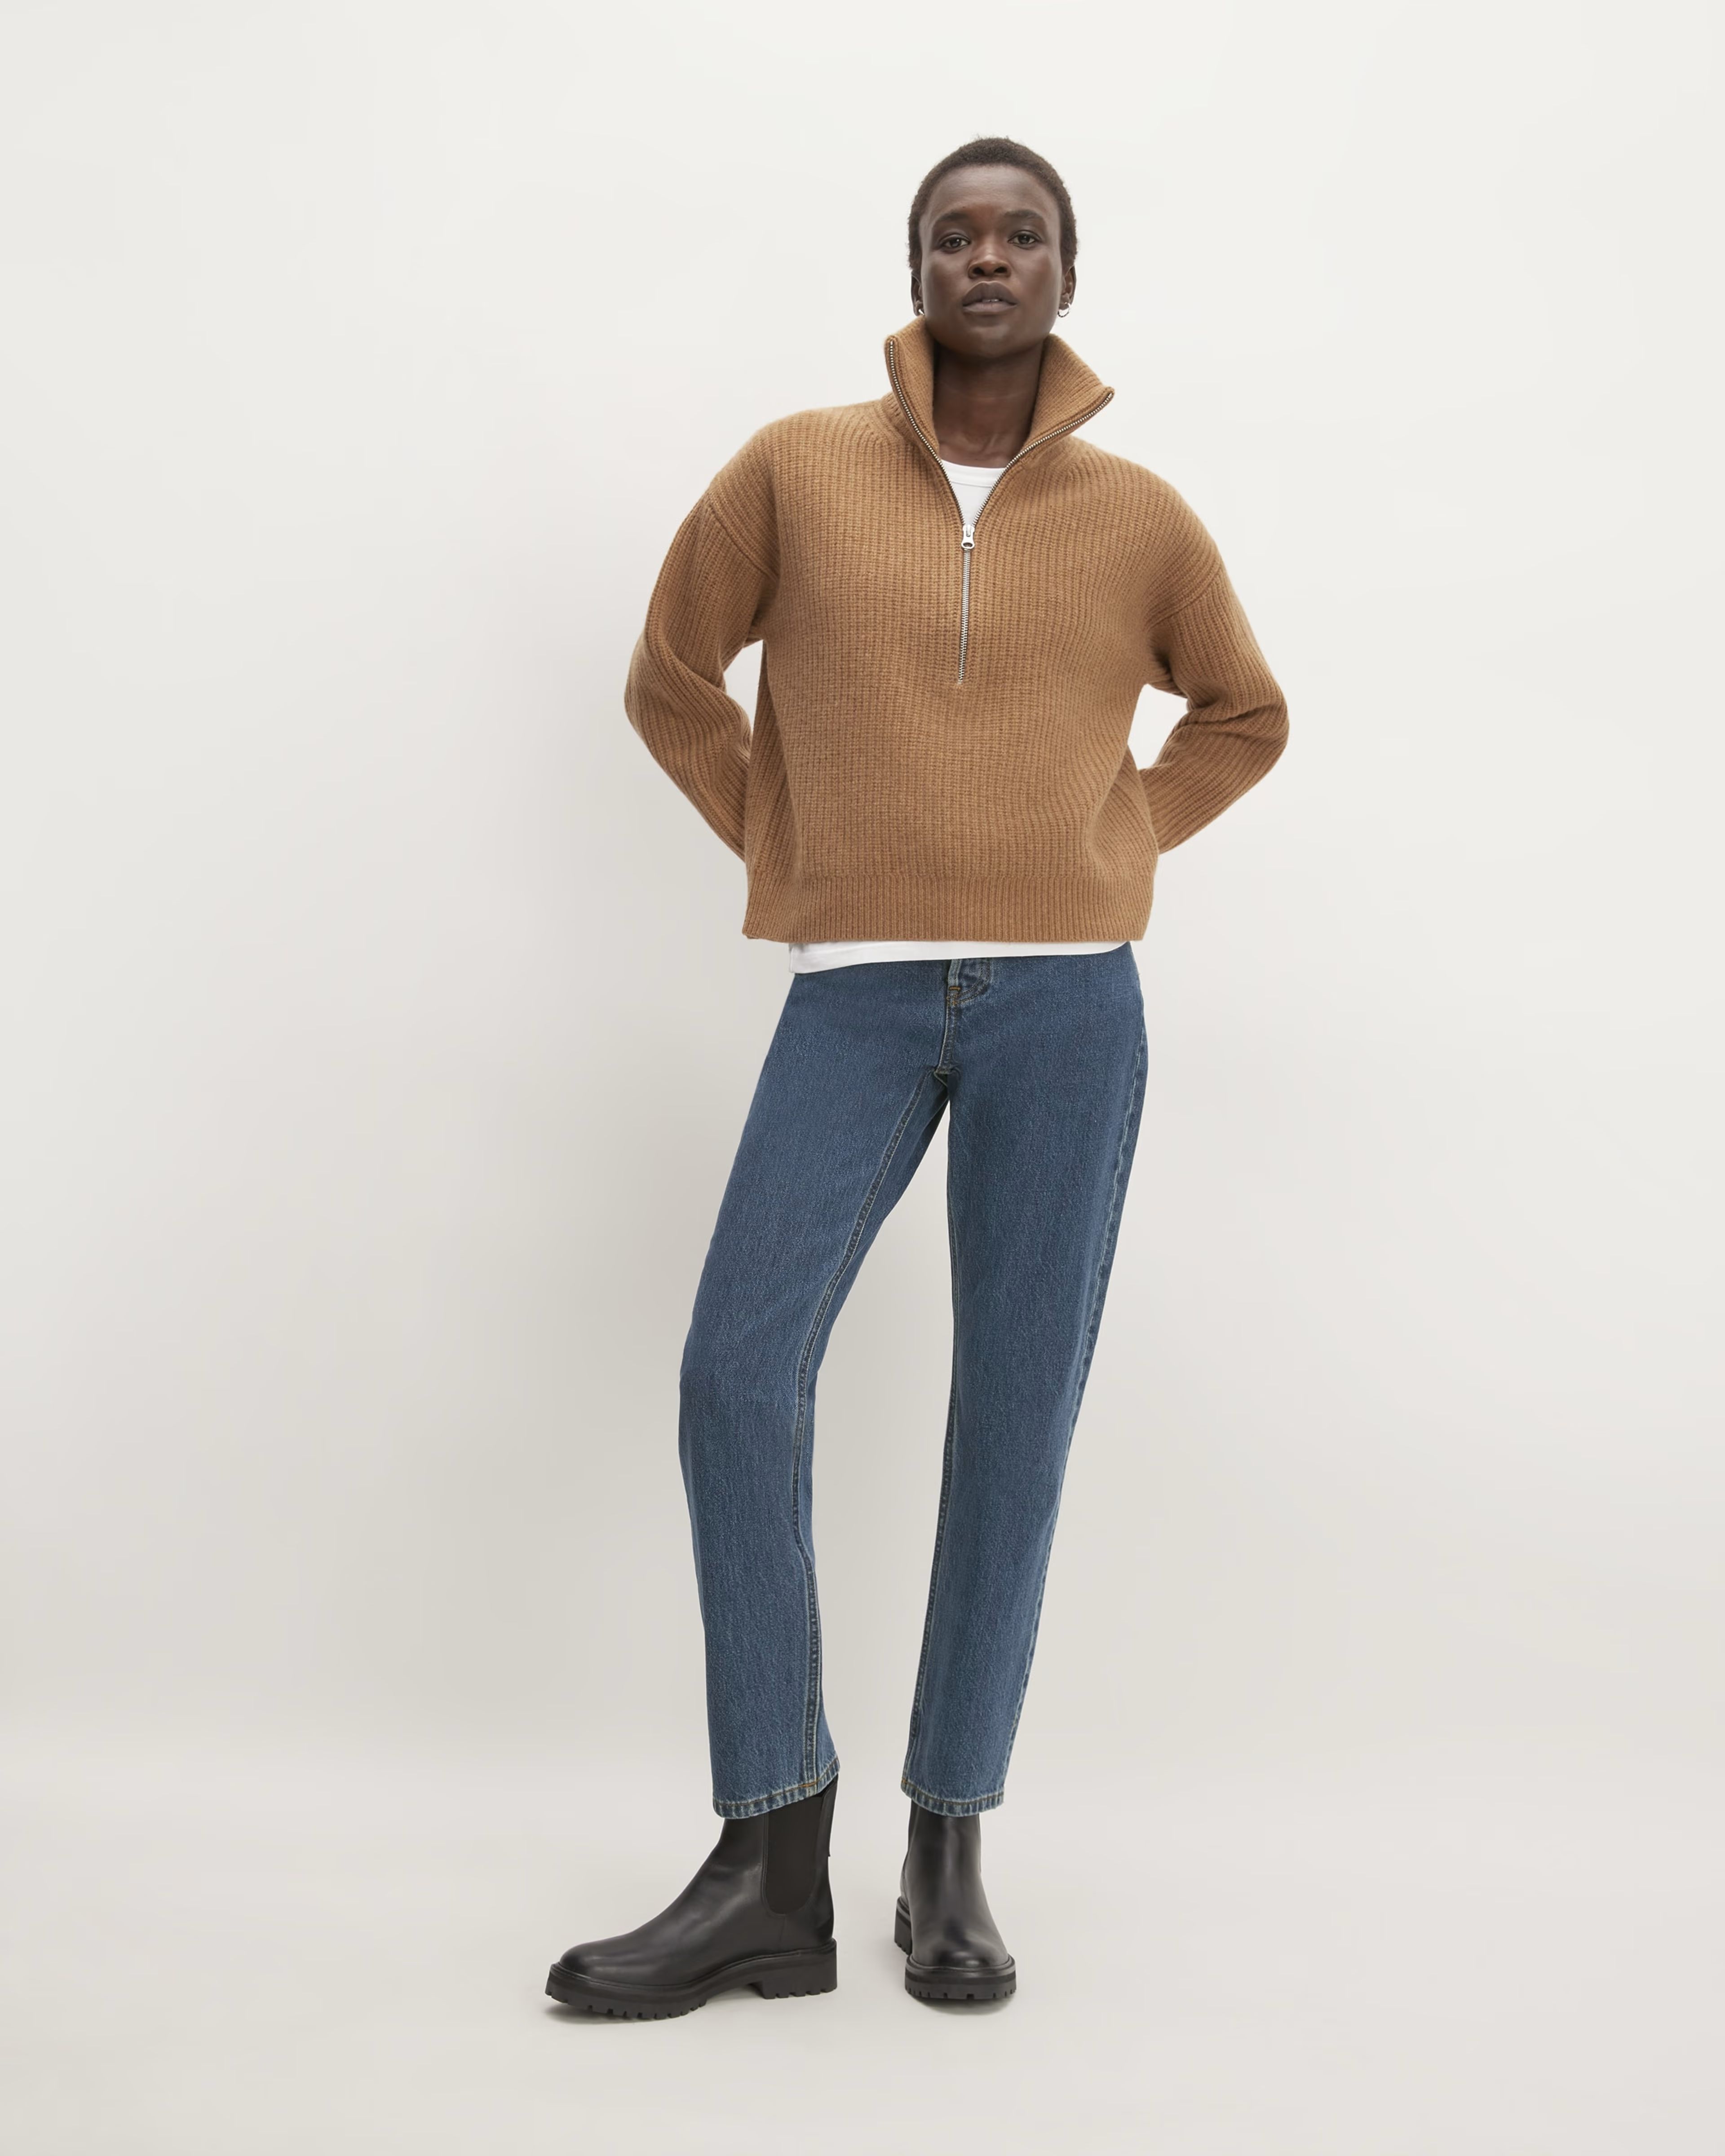 The ’90s Cheeky® Jean$1104.3 (3050 Reviews)4.3 out of 5 stars. 3050 reviews Hourglass shape? T... | Everlane